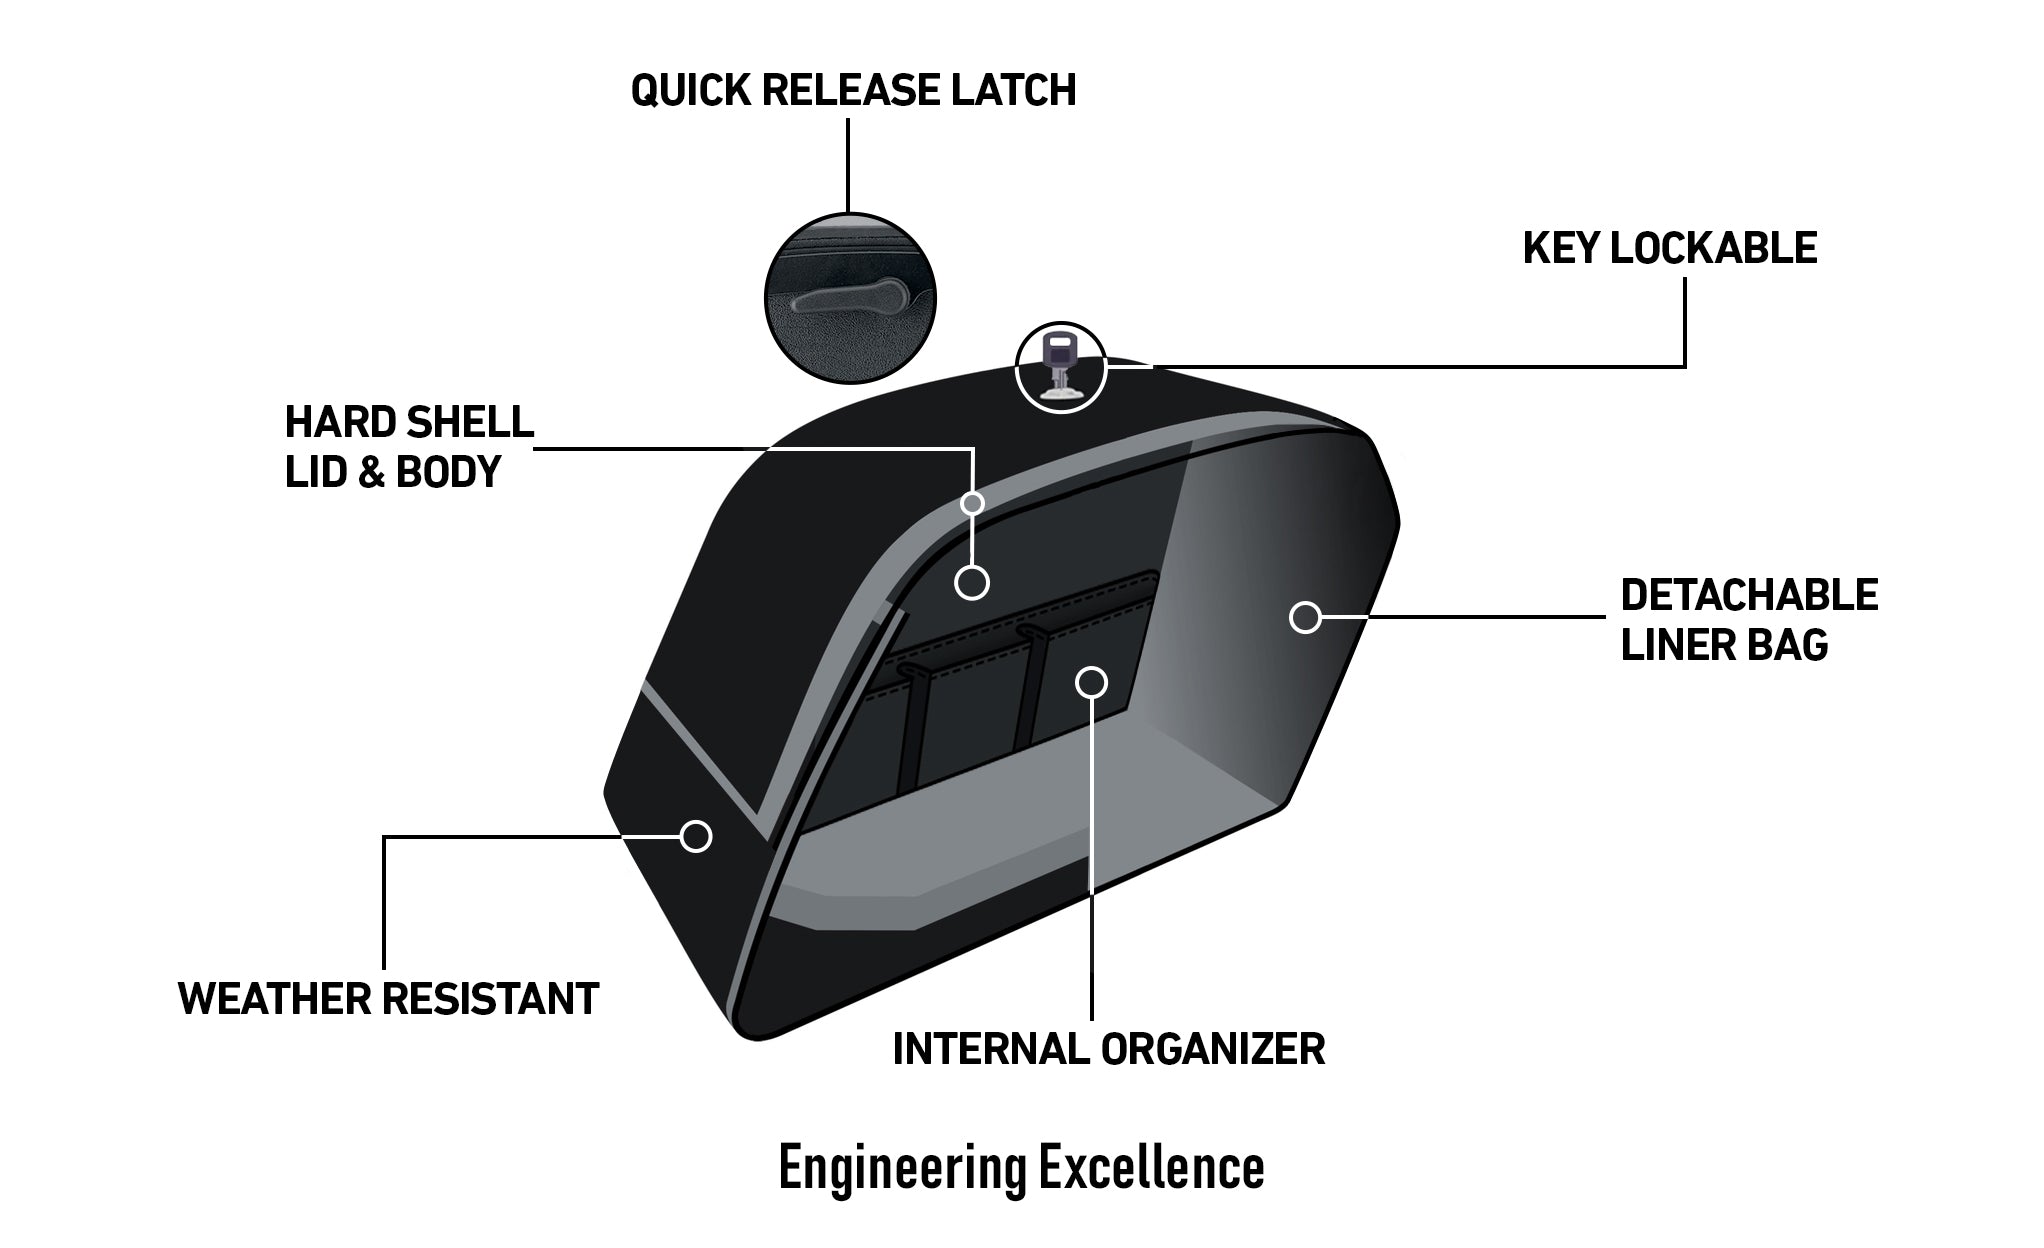 Viking Baldur Extra Large Painted Motorcycle Hard Saddlebags For Harley Softail Standard Fxst I Engineering Excellence with Bag on Bike @expand